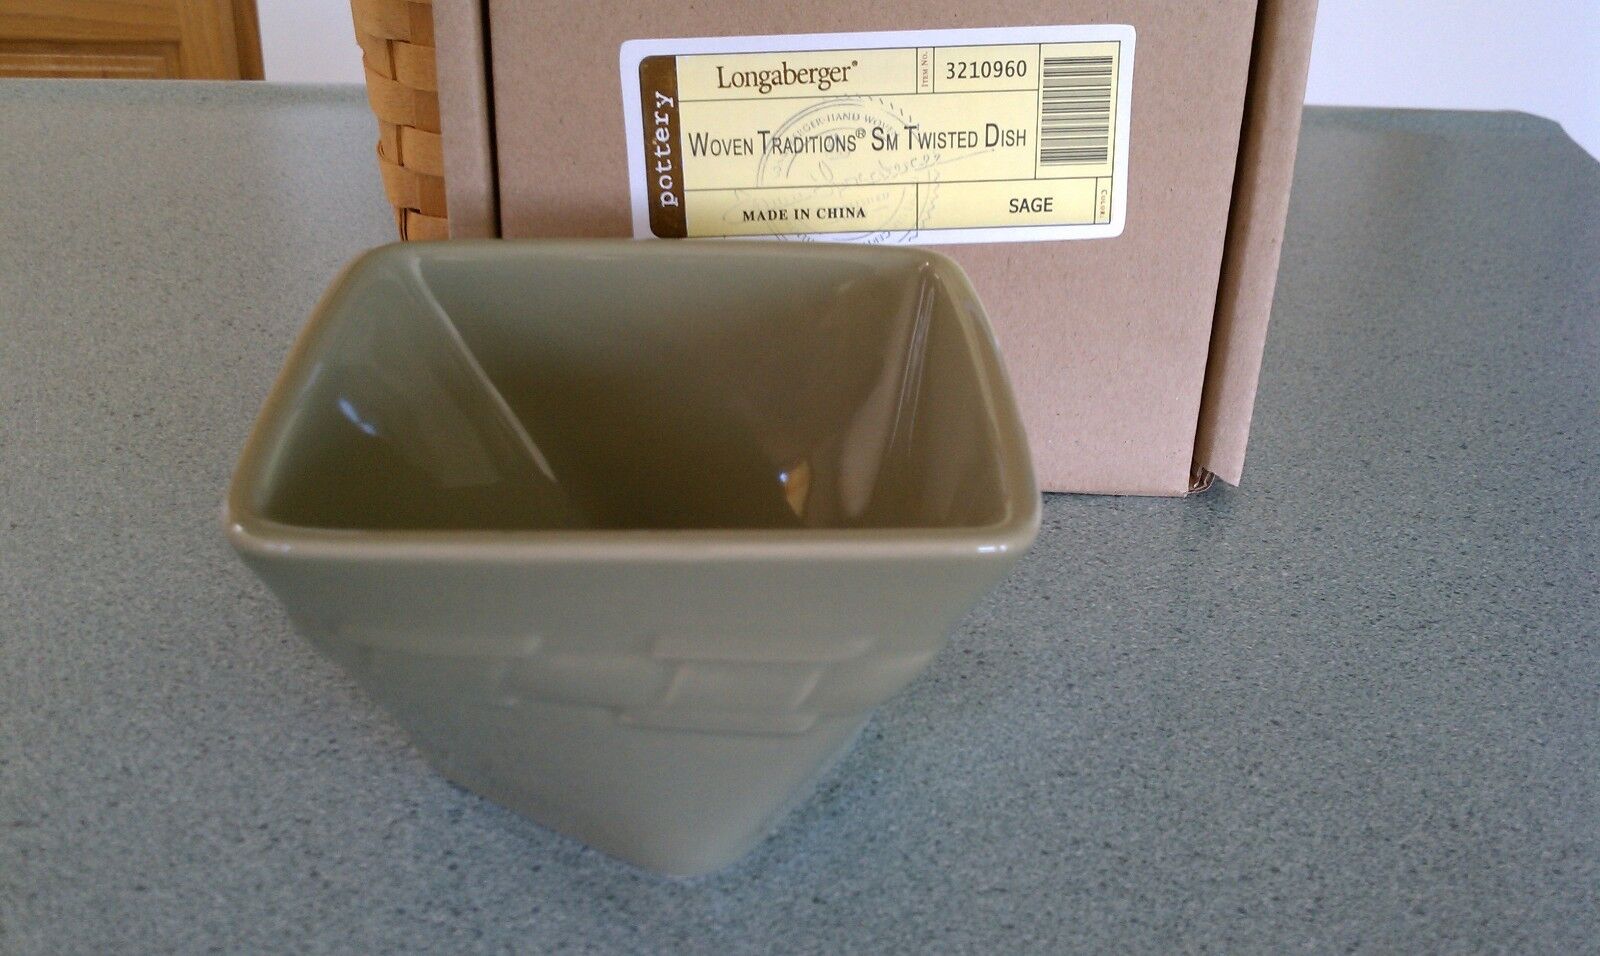 Longaberger Pottery small Twist bowl snack dish Sage green NEW in box